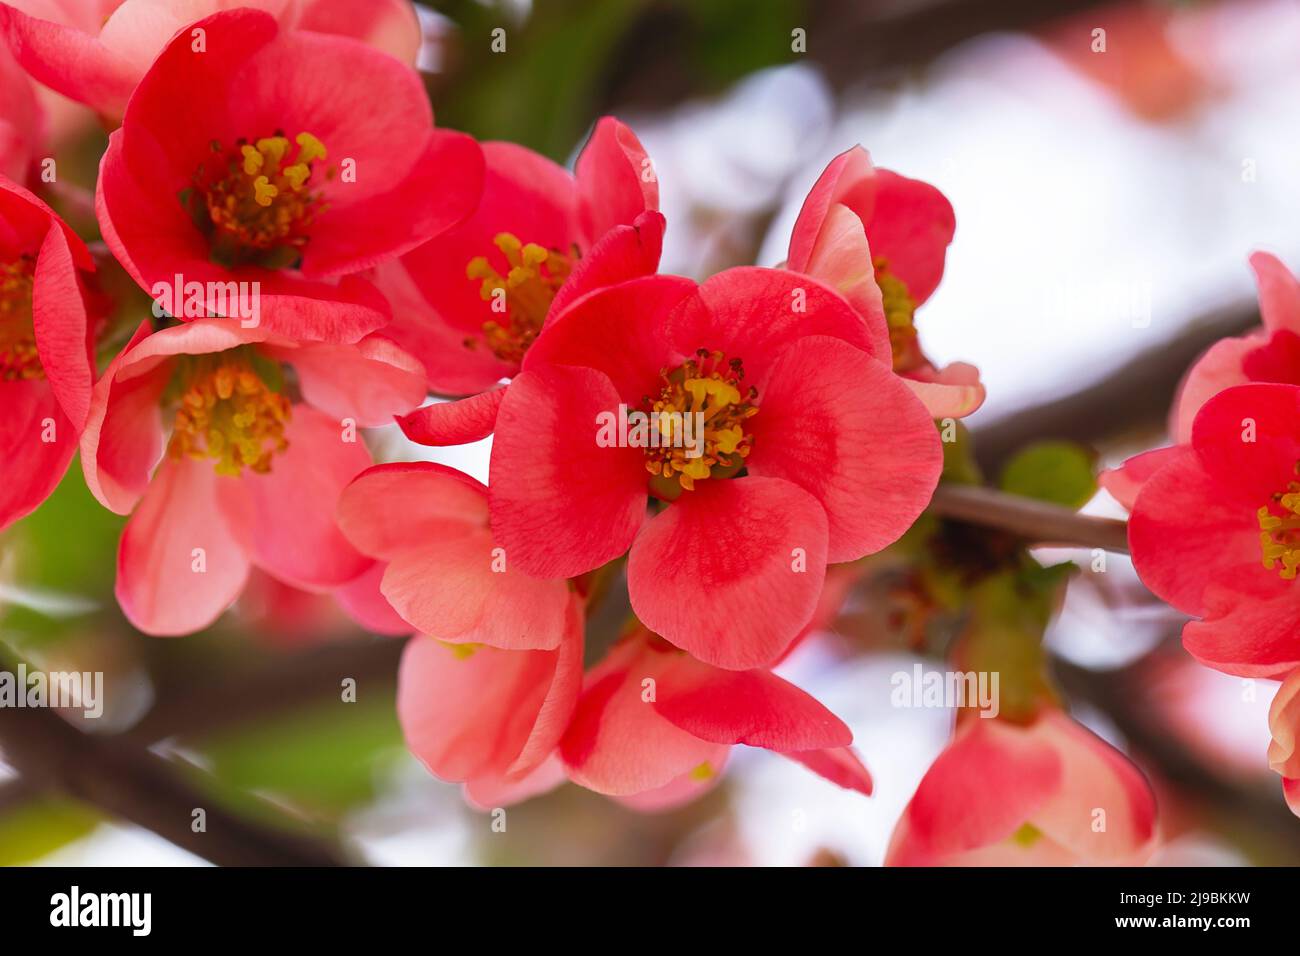 Bright red flowers of a Flowering quince, Chaenomeles speciosa, shrub. a thorny deciduous or semi-evergreen shrub also known as Japanese quince or Chi Stock Photo